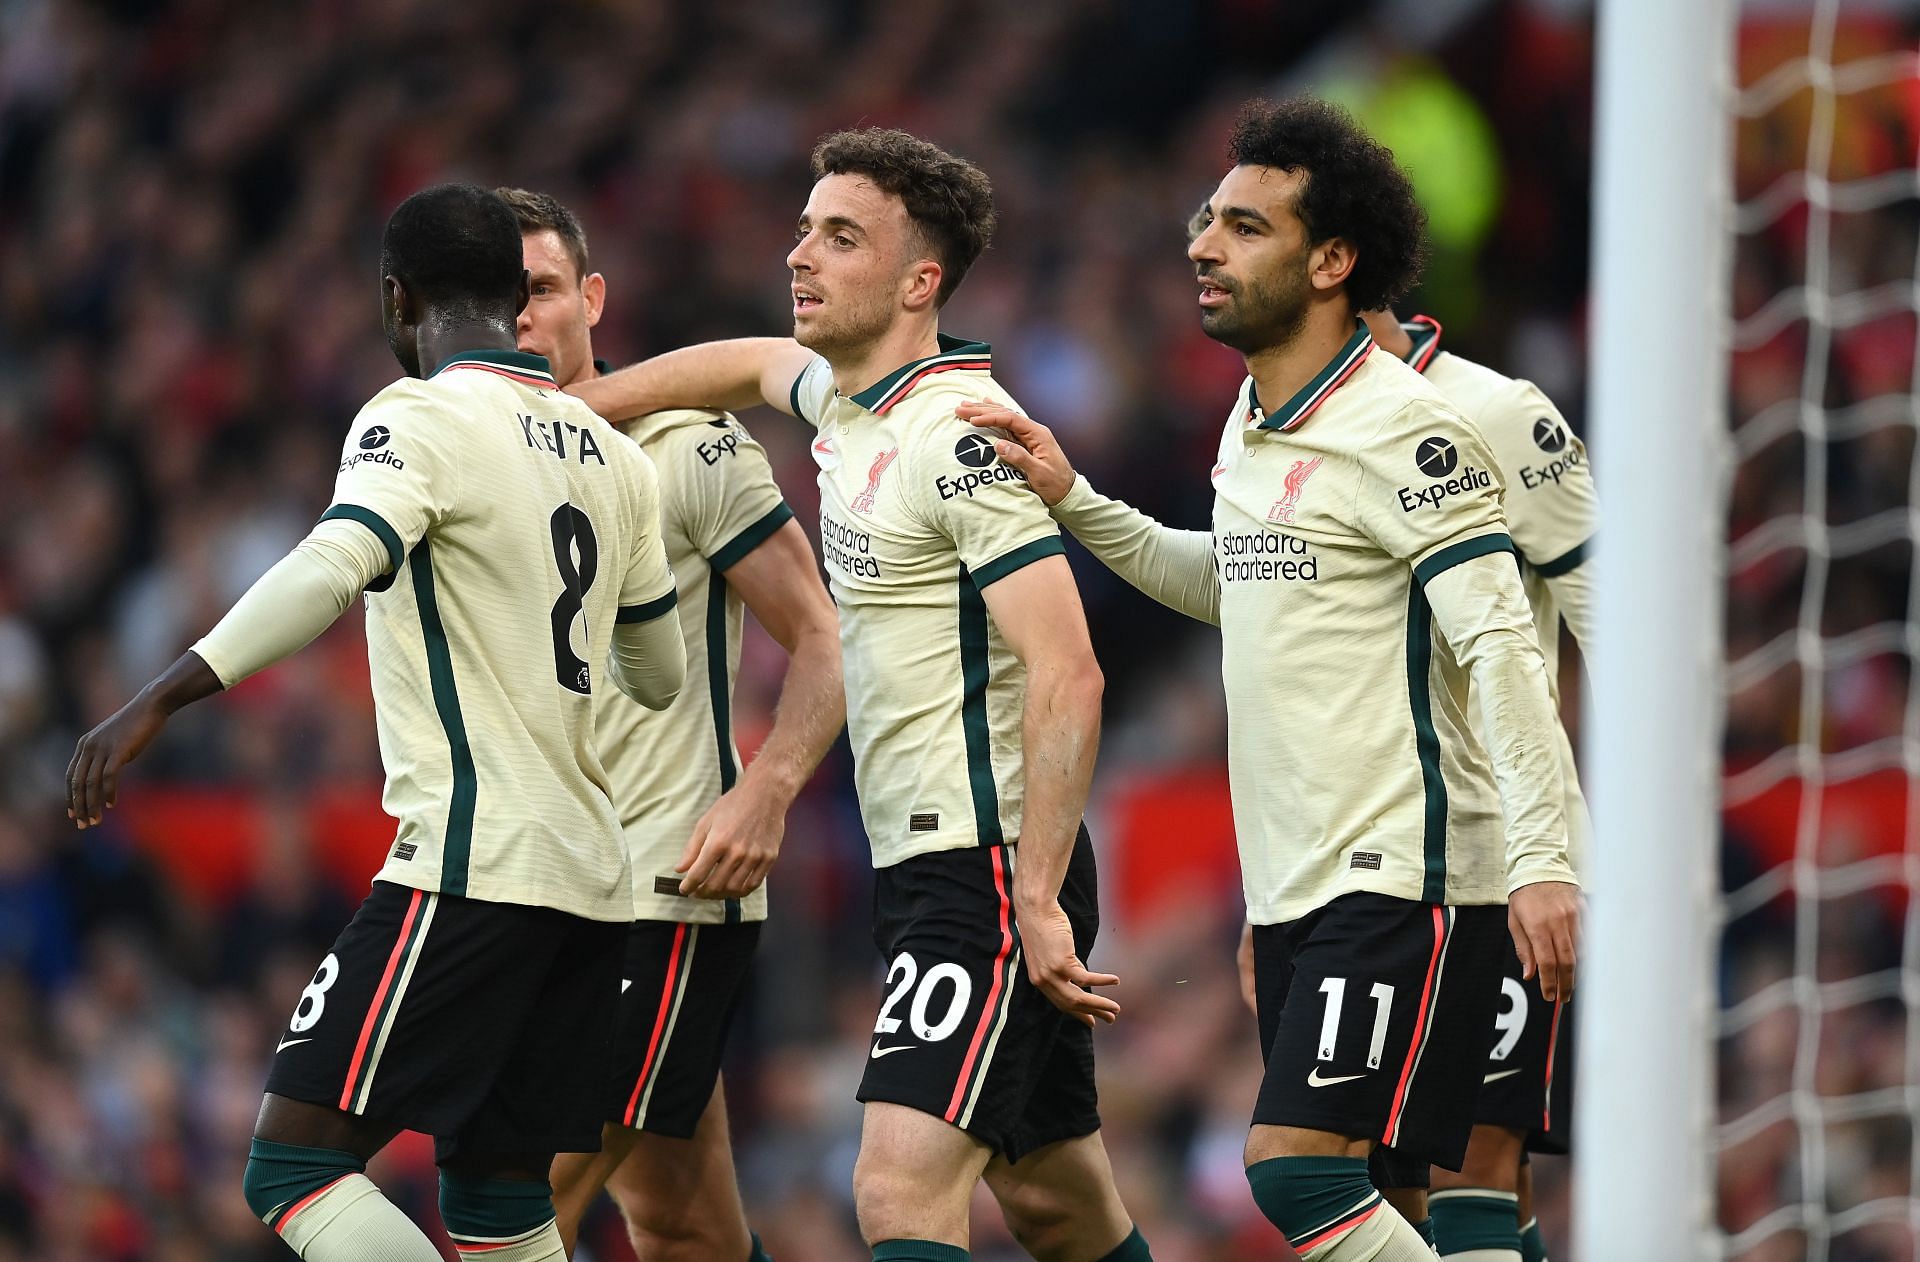 Liverpool thrashed Manchester United last weekend